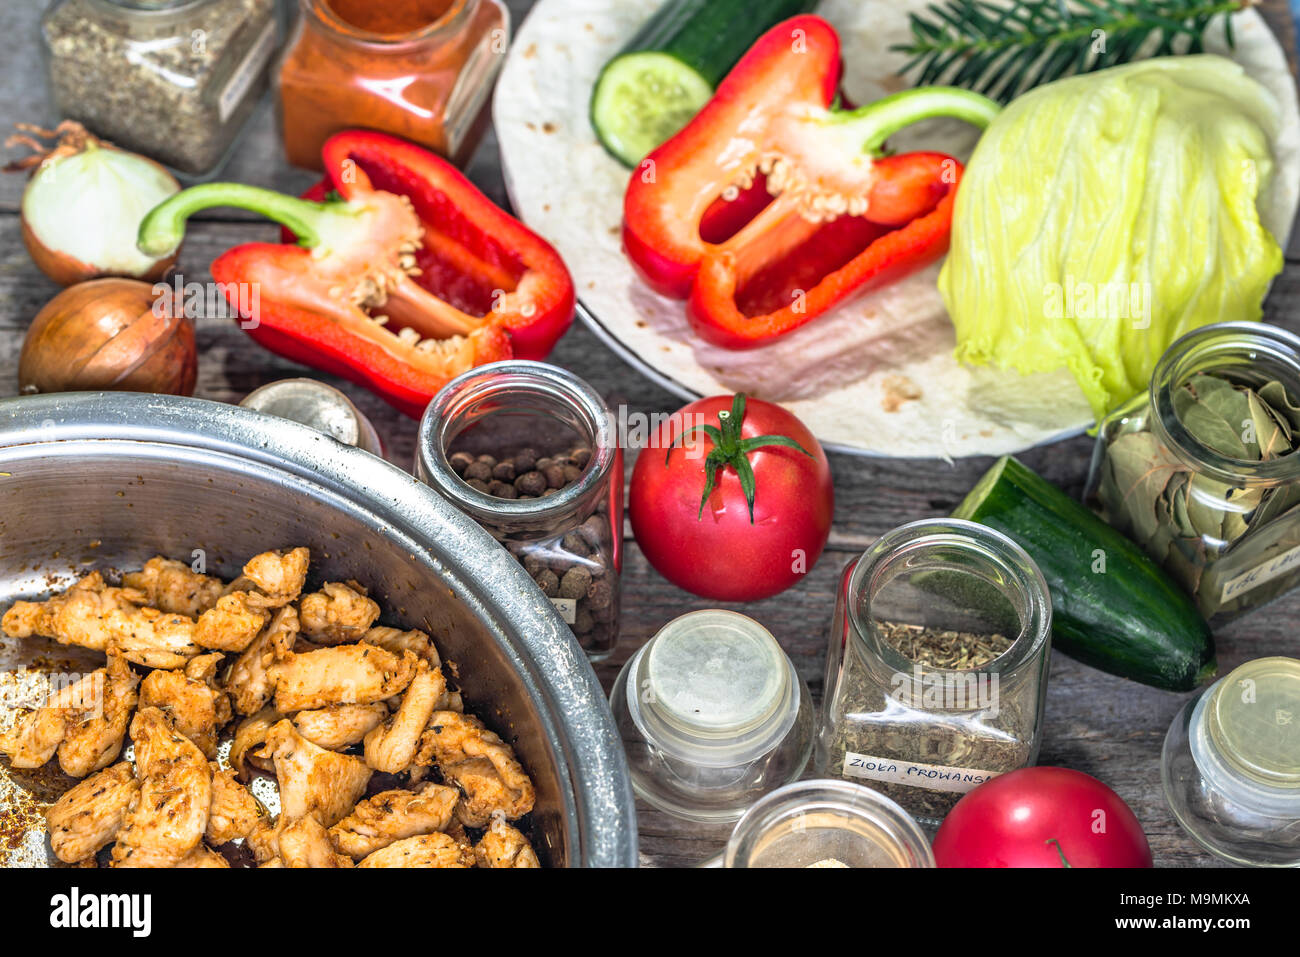 Preparation Of Vegetables Pureed In A Restaurant. Stock Photo, Picture and  Royalty Free Image. Image 74212966.